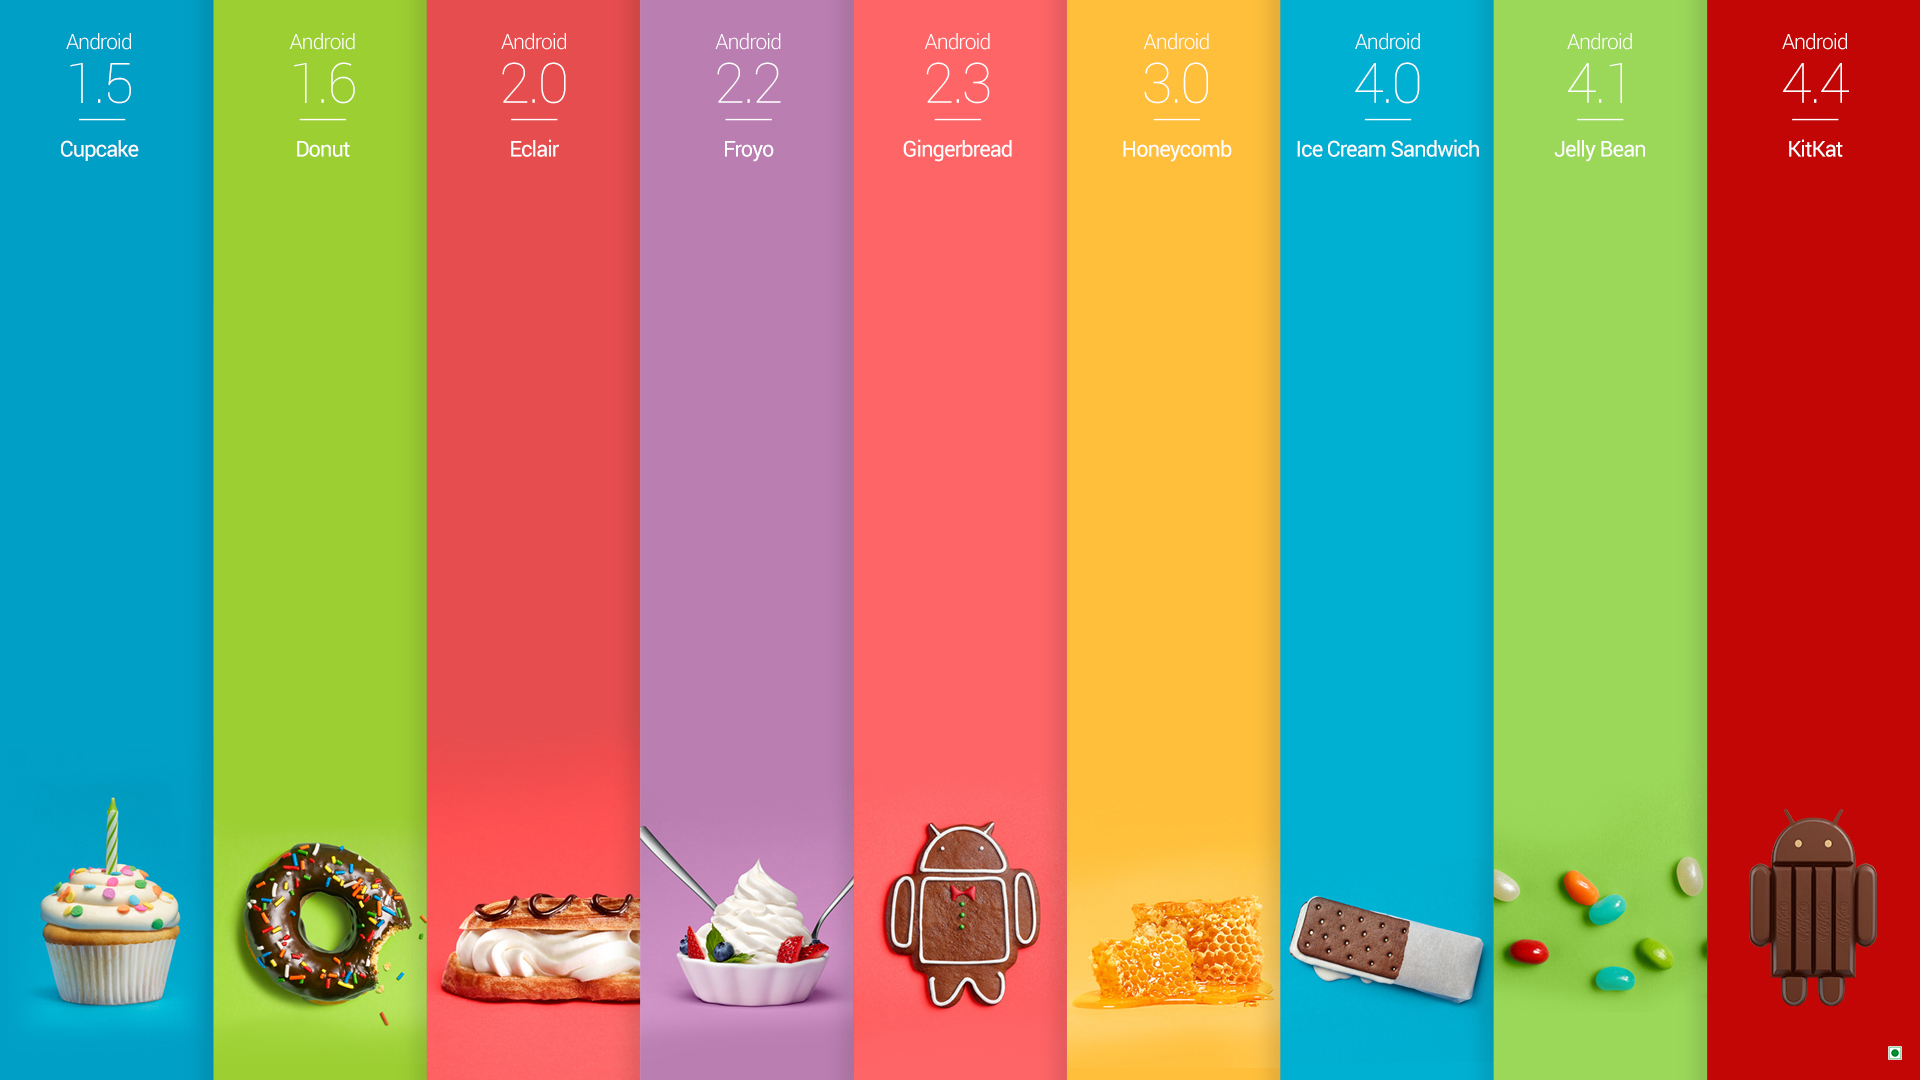 Android Kitkat Teased With Updates For Hangouts Gmail Search